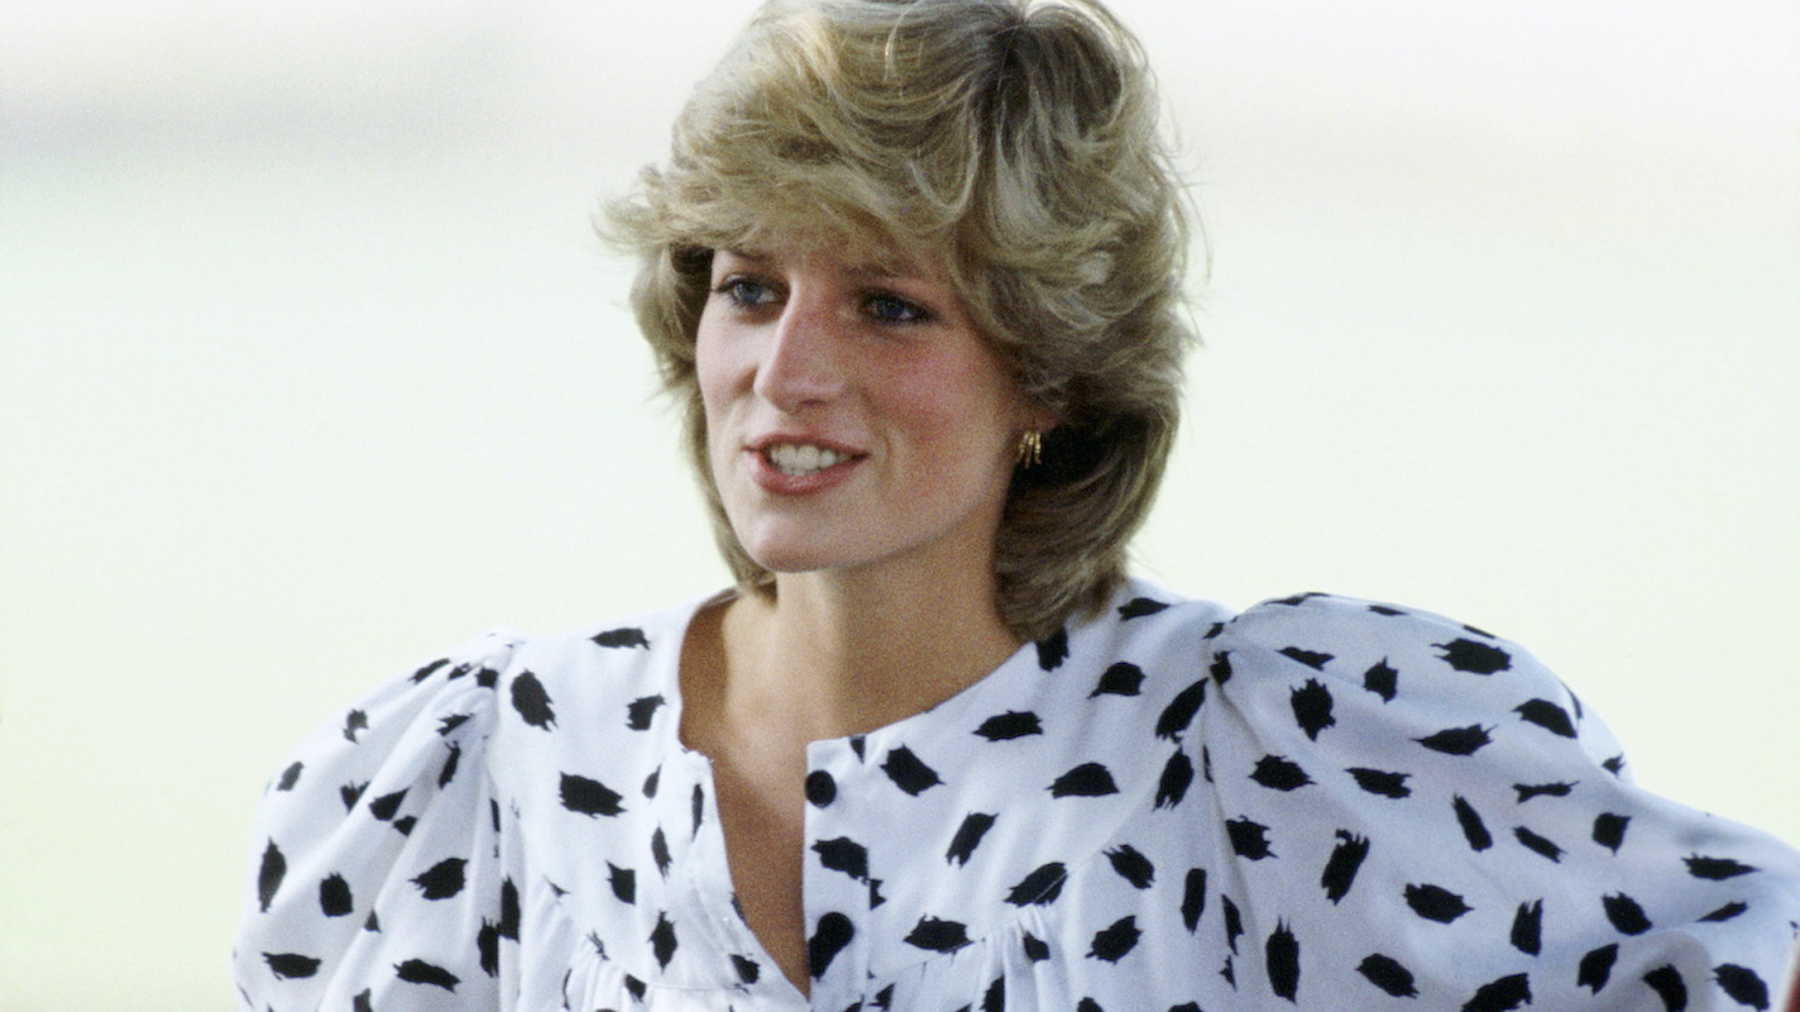 Princess Diana In The 80s